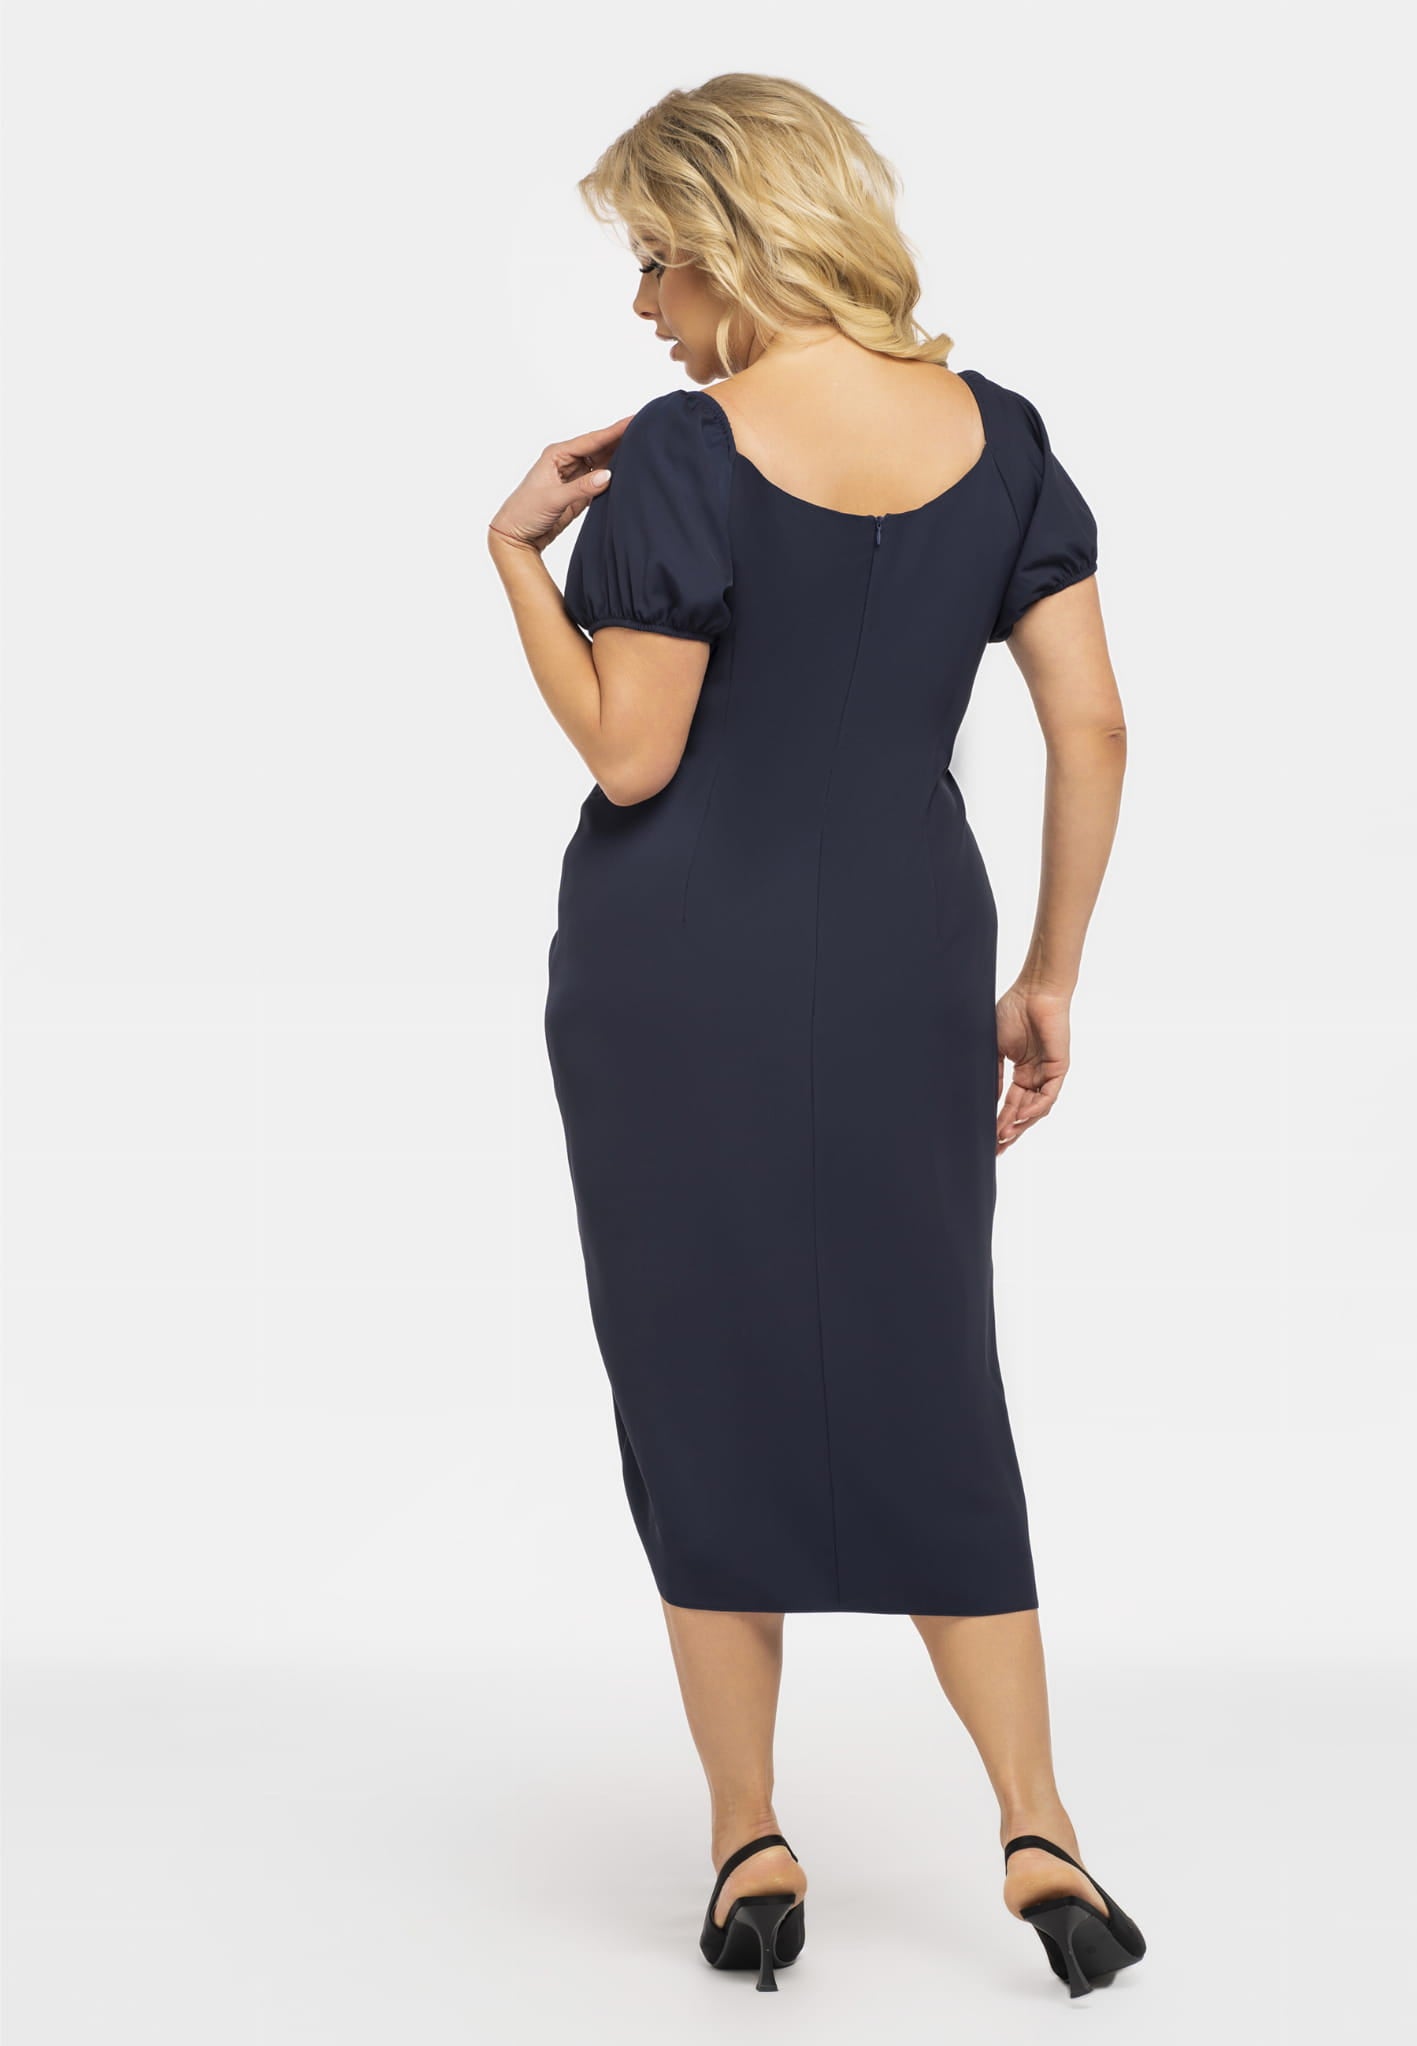 SC414/38-3-Women's dress with crinkle INESSA navy blue-3